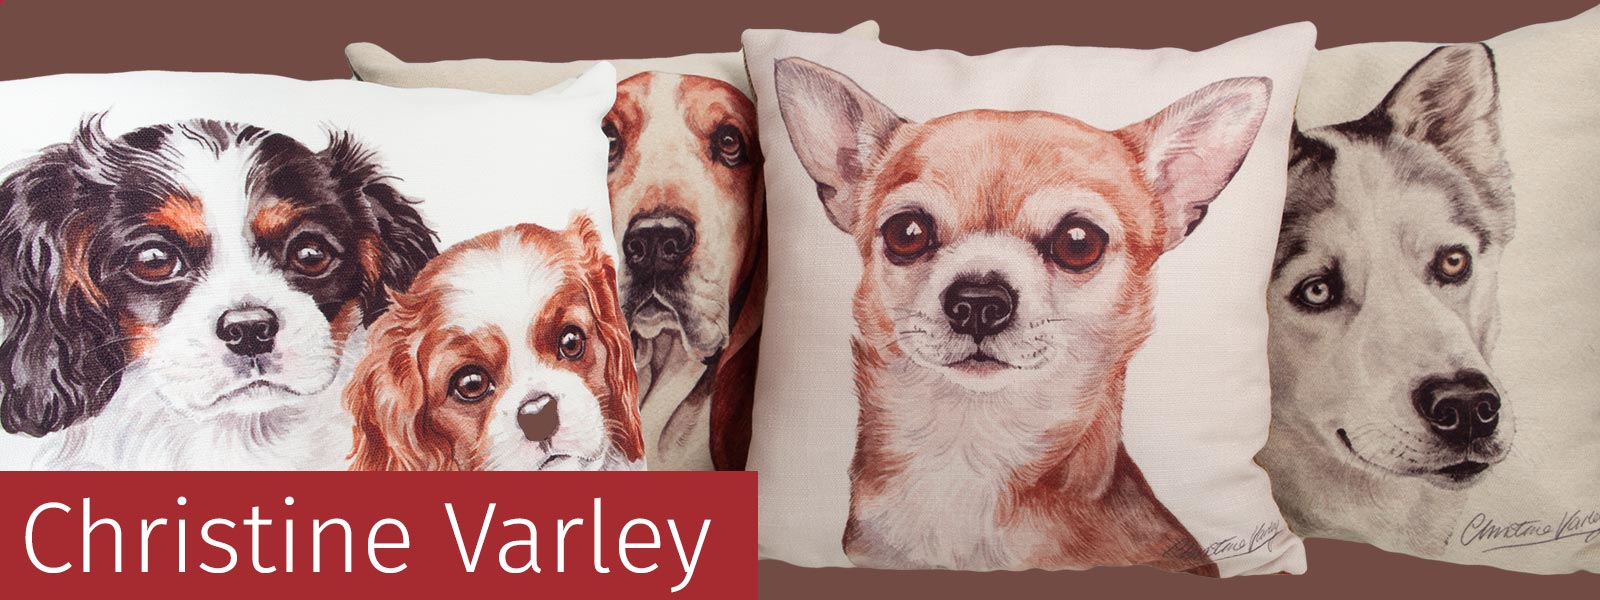 Waggy Dogz the fantastic range of mugs, cushions and bags featuring spectacular dog artwork by Christine Varley